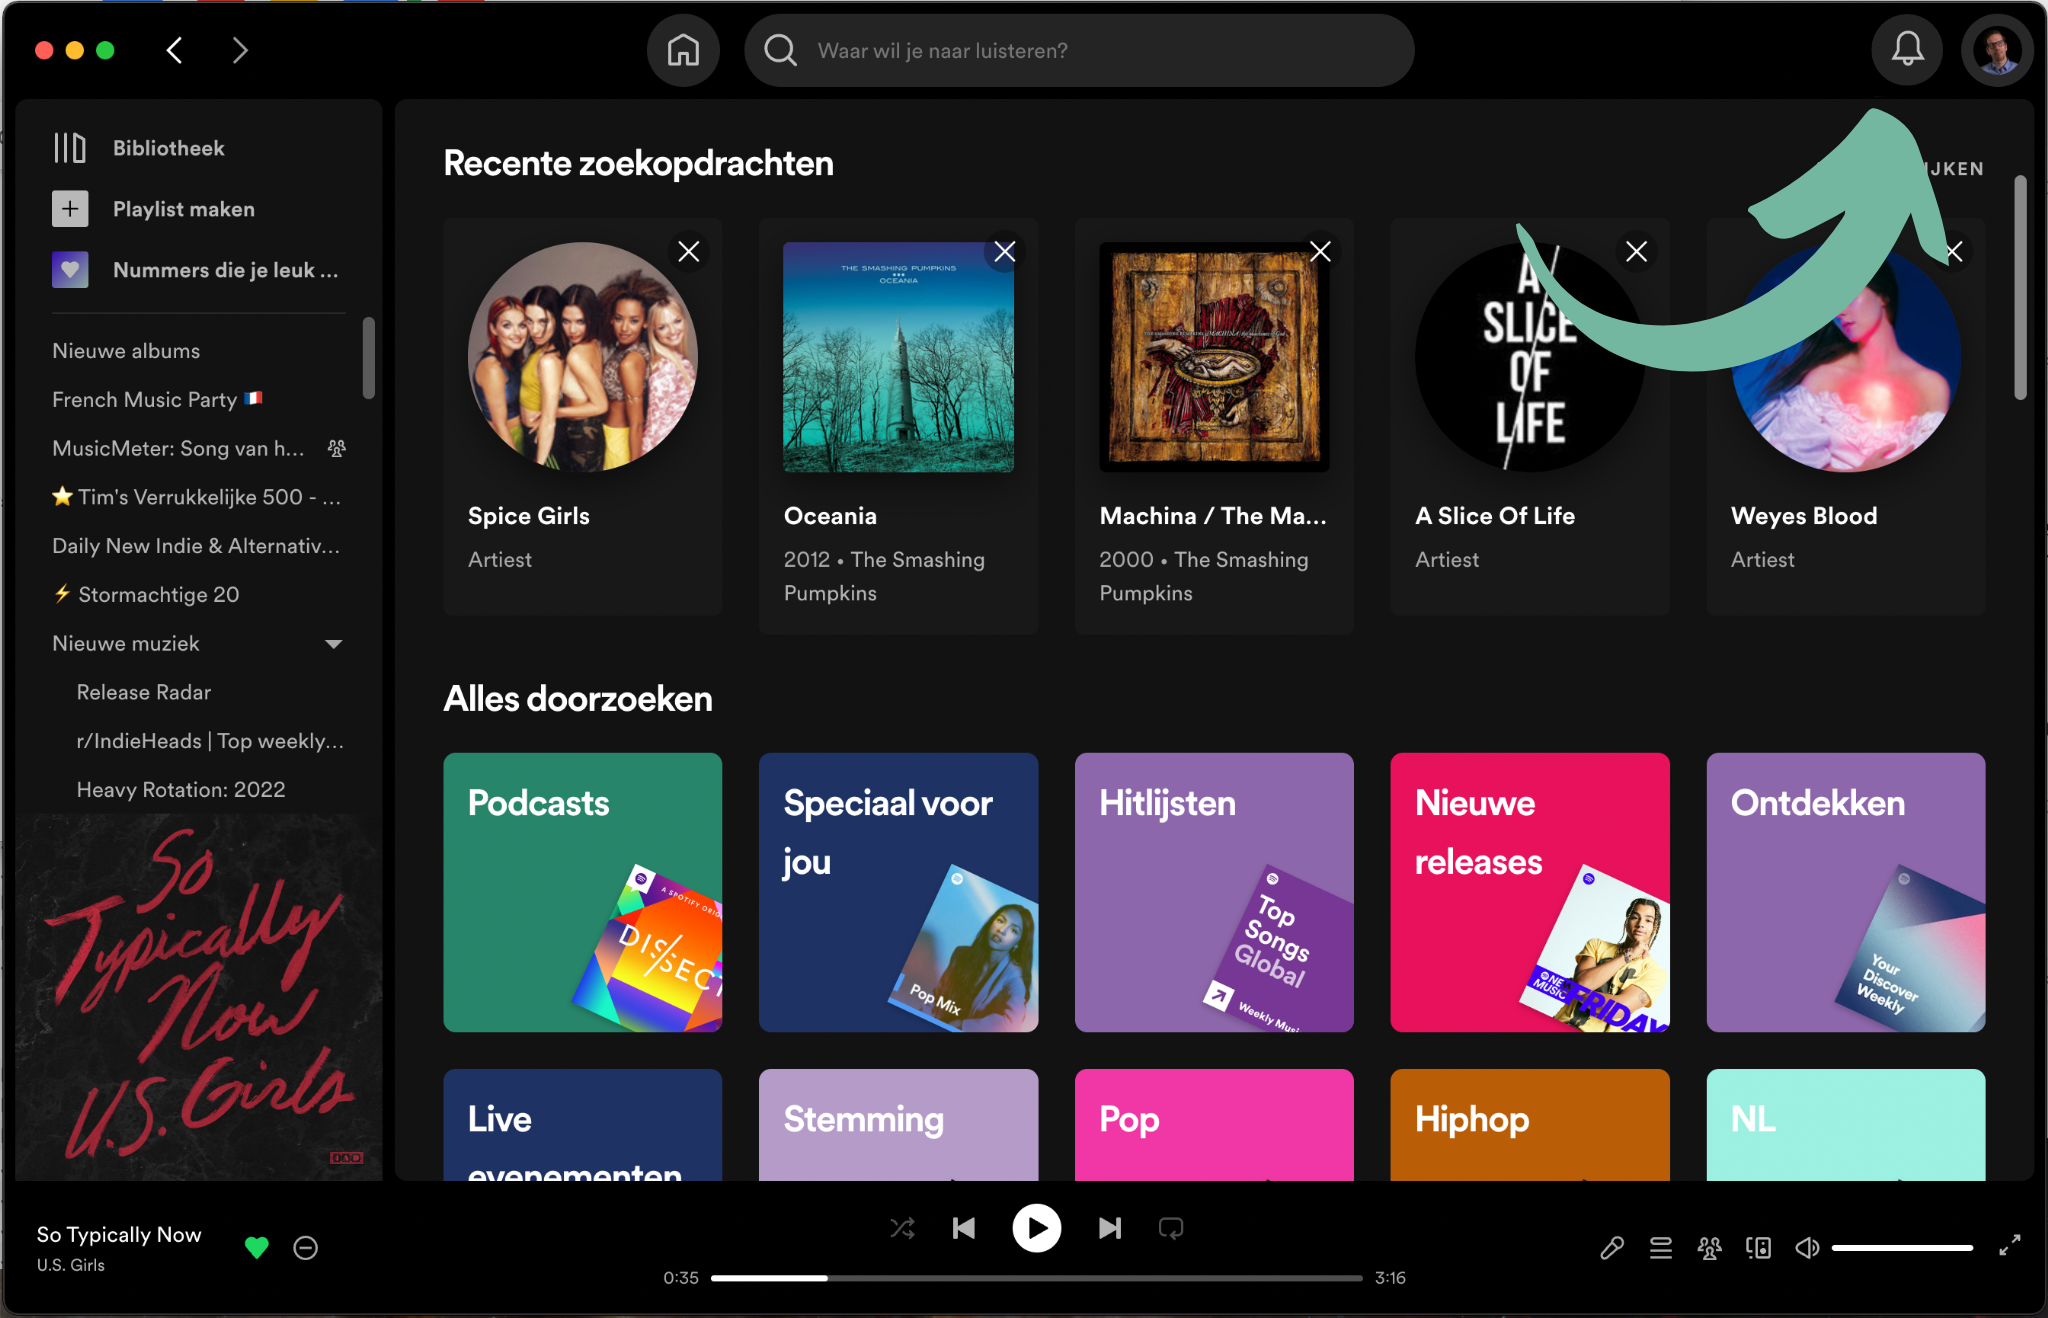 Desktop][Discover] new release button - The Spotify Community